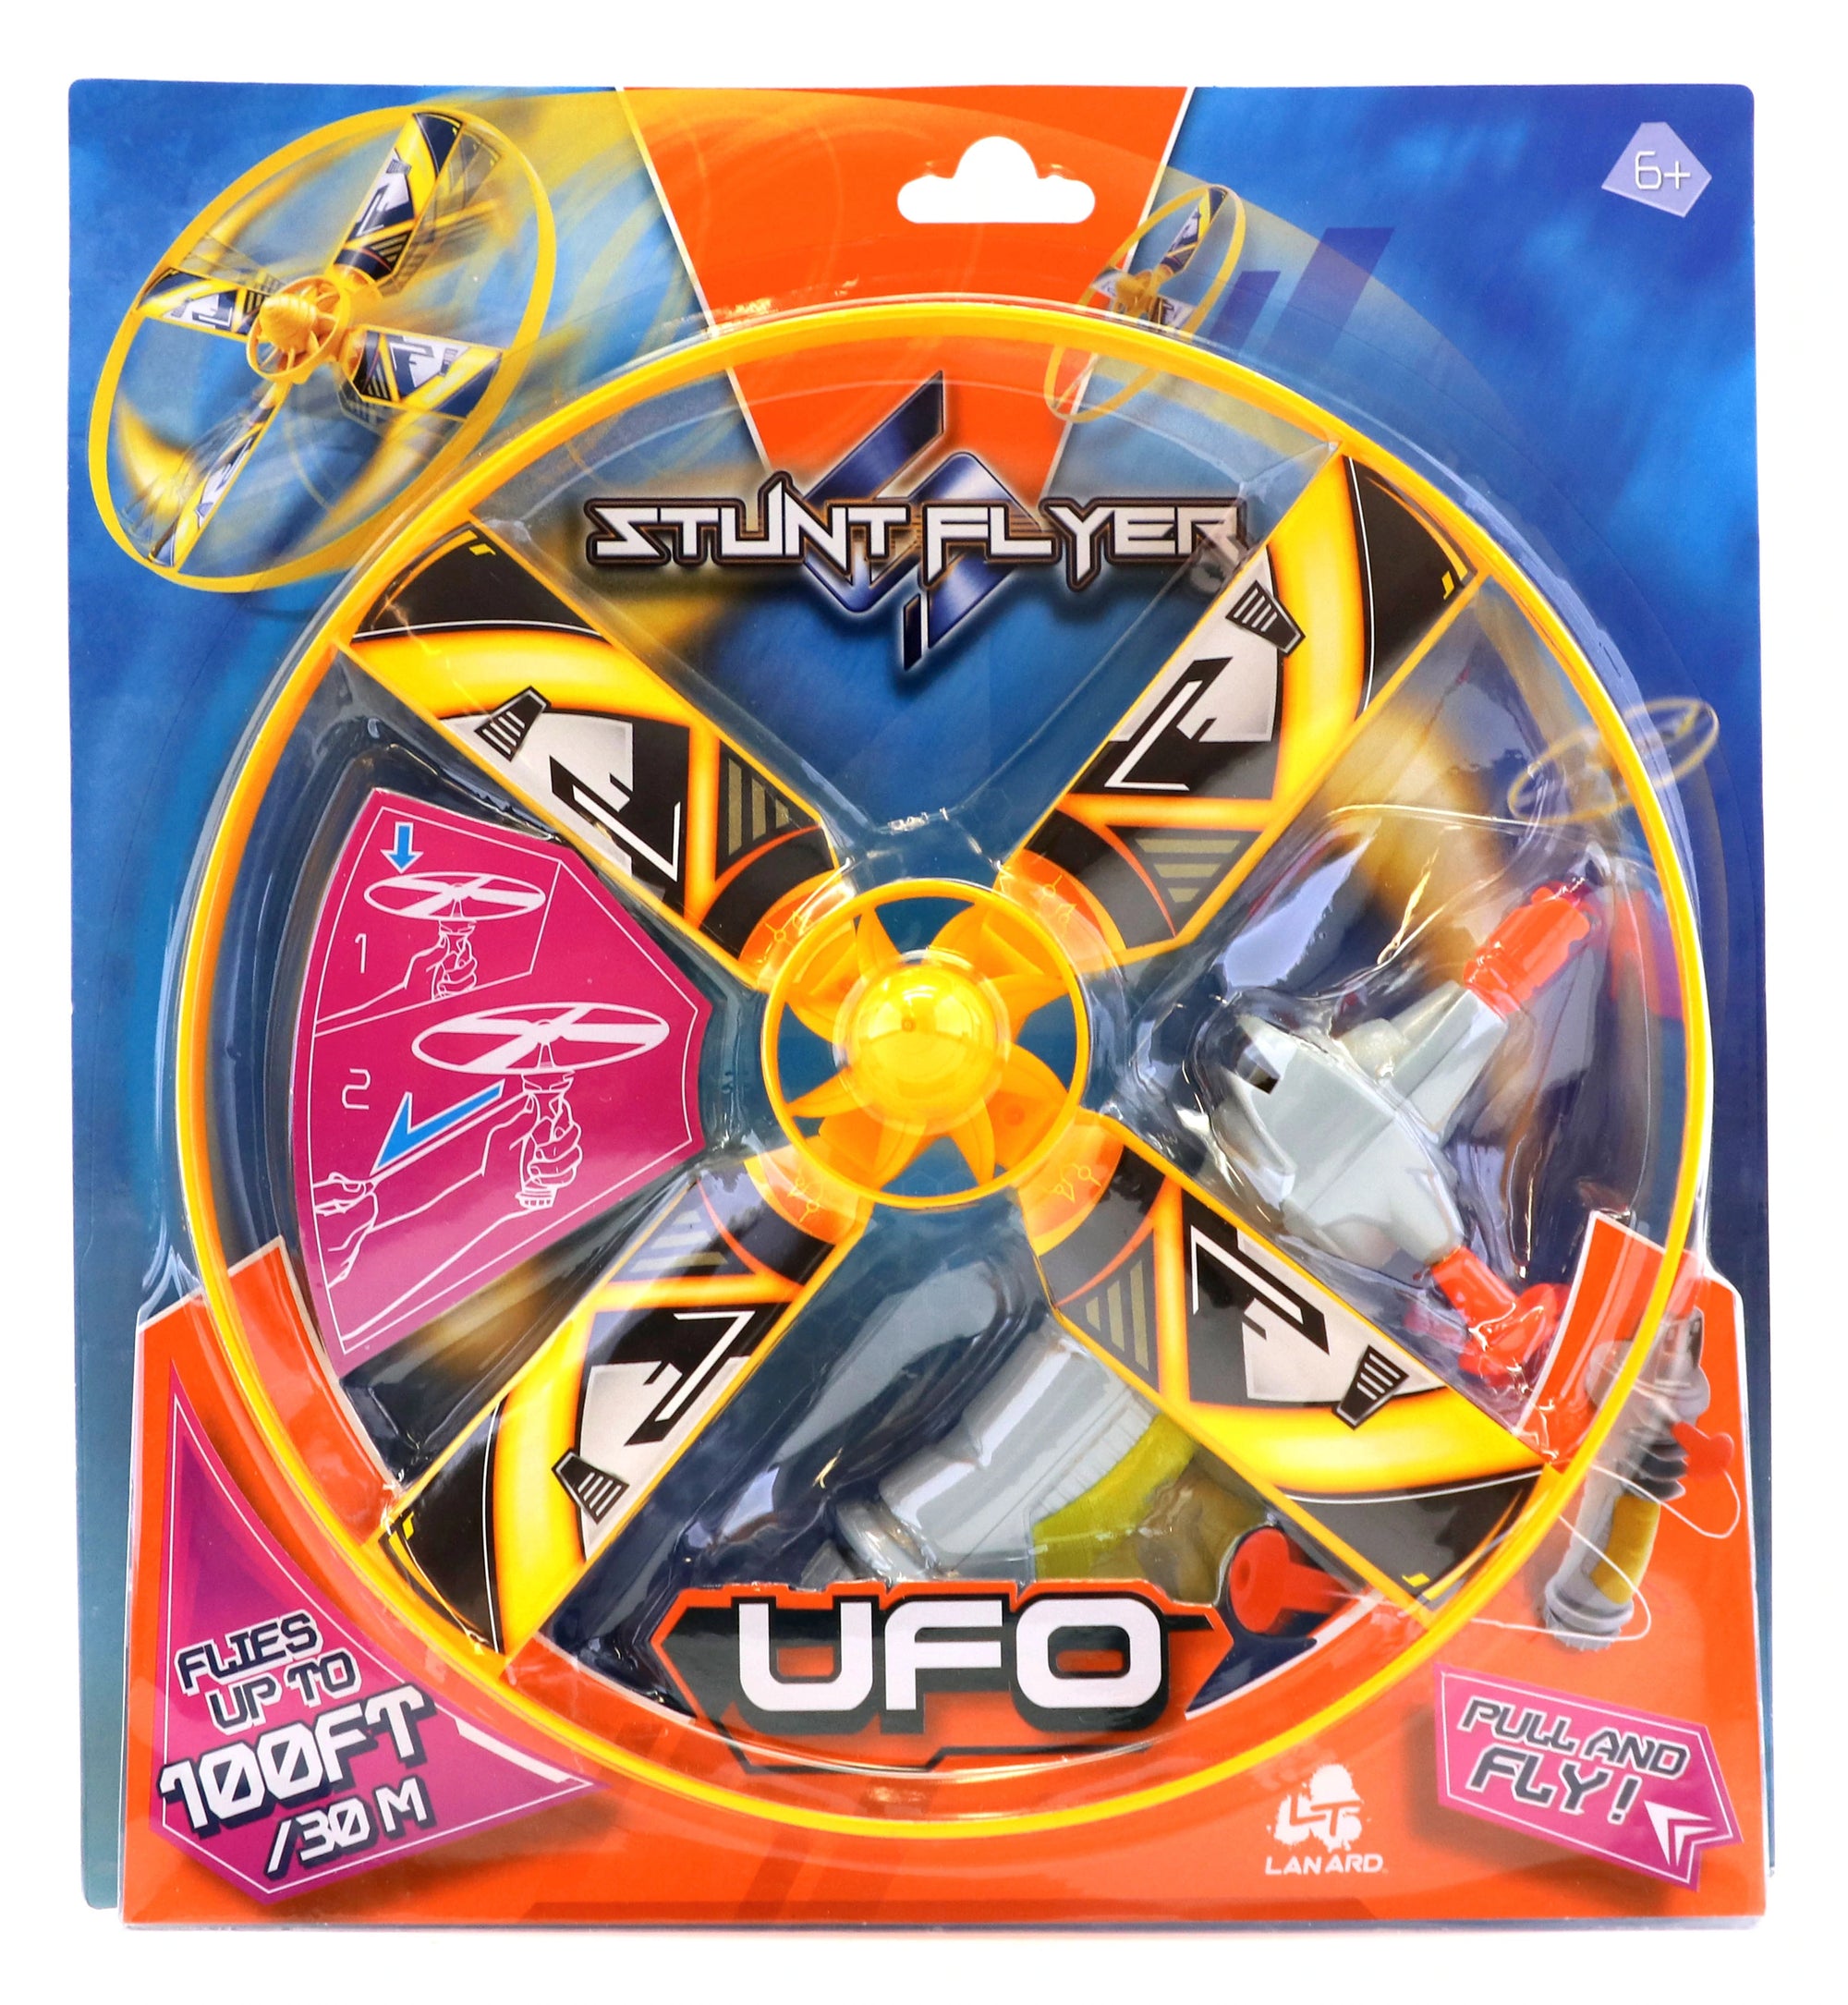 Stunt Flyer UFO Pull and Fly